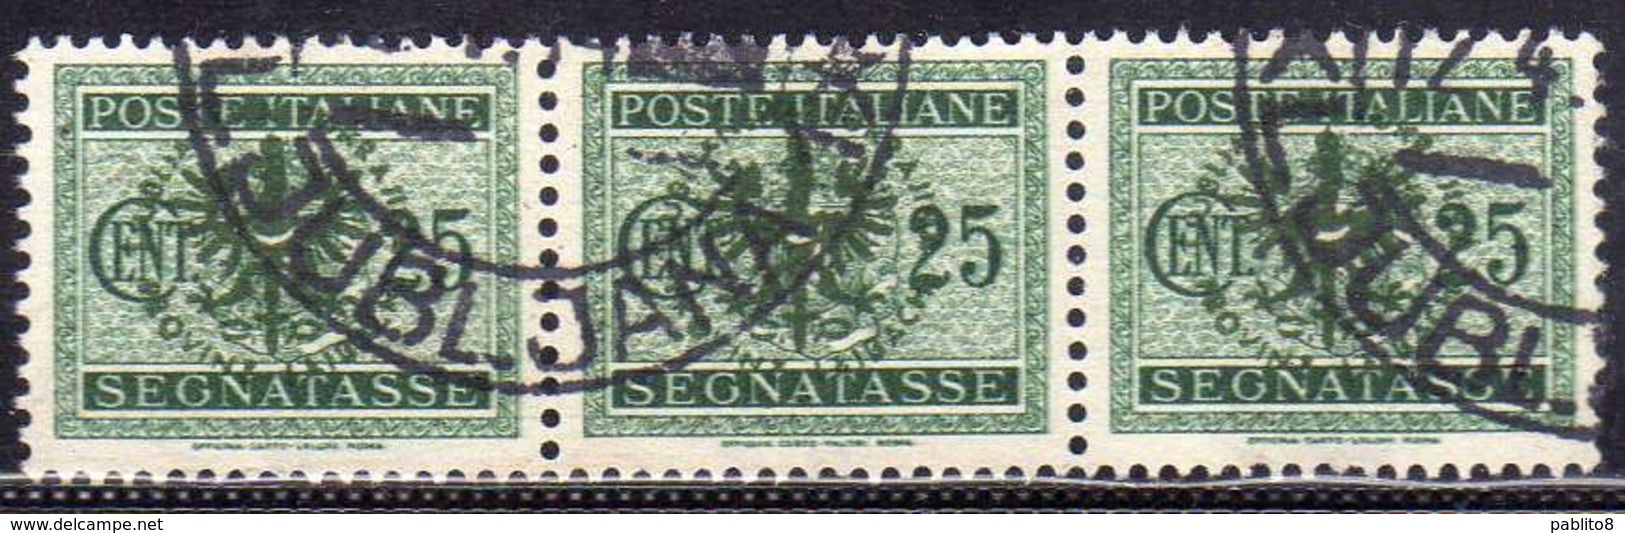 LUBIANA 1944 OCCUPAZIONE TEDESCA GERMAN OCCUPATION SEGNATASSE POSTAGE DUE TASSE TAXE CENT. 25c USATO USED OBLITERE' - German Occ.: Lubiana